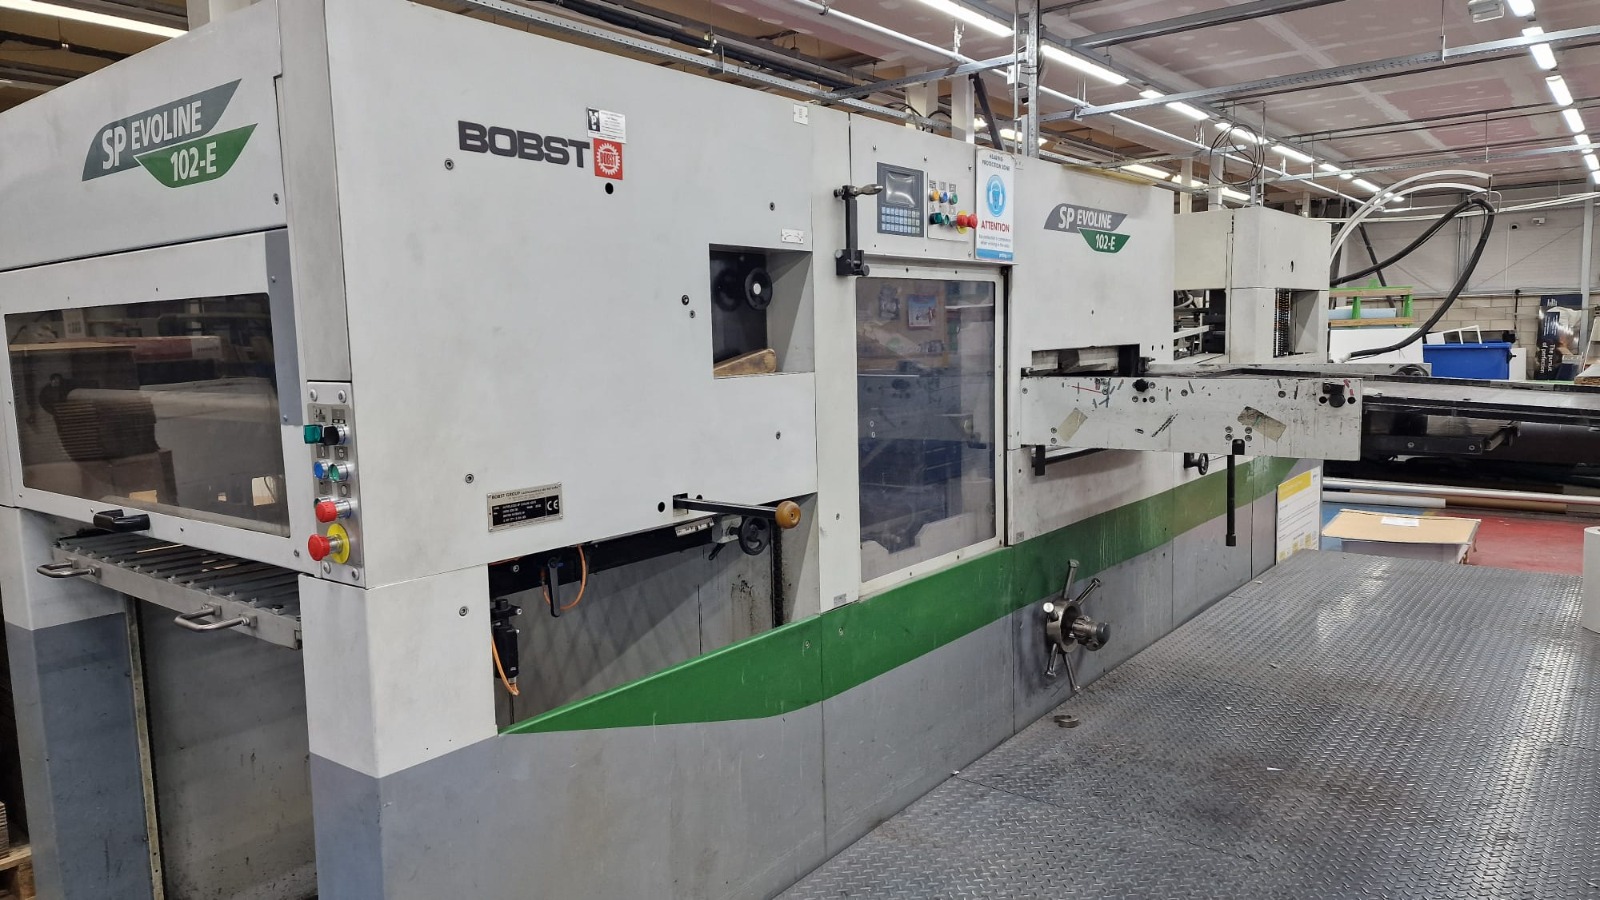 Bobst SP EVOLINE 102-E Year 2002 Size 